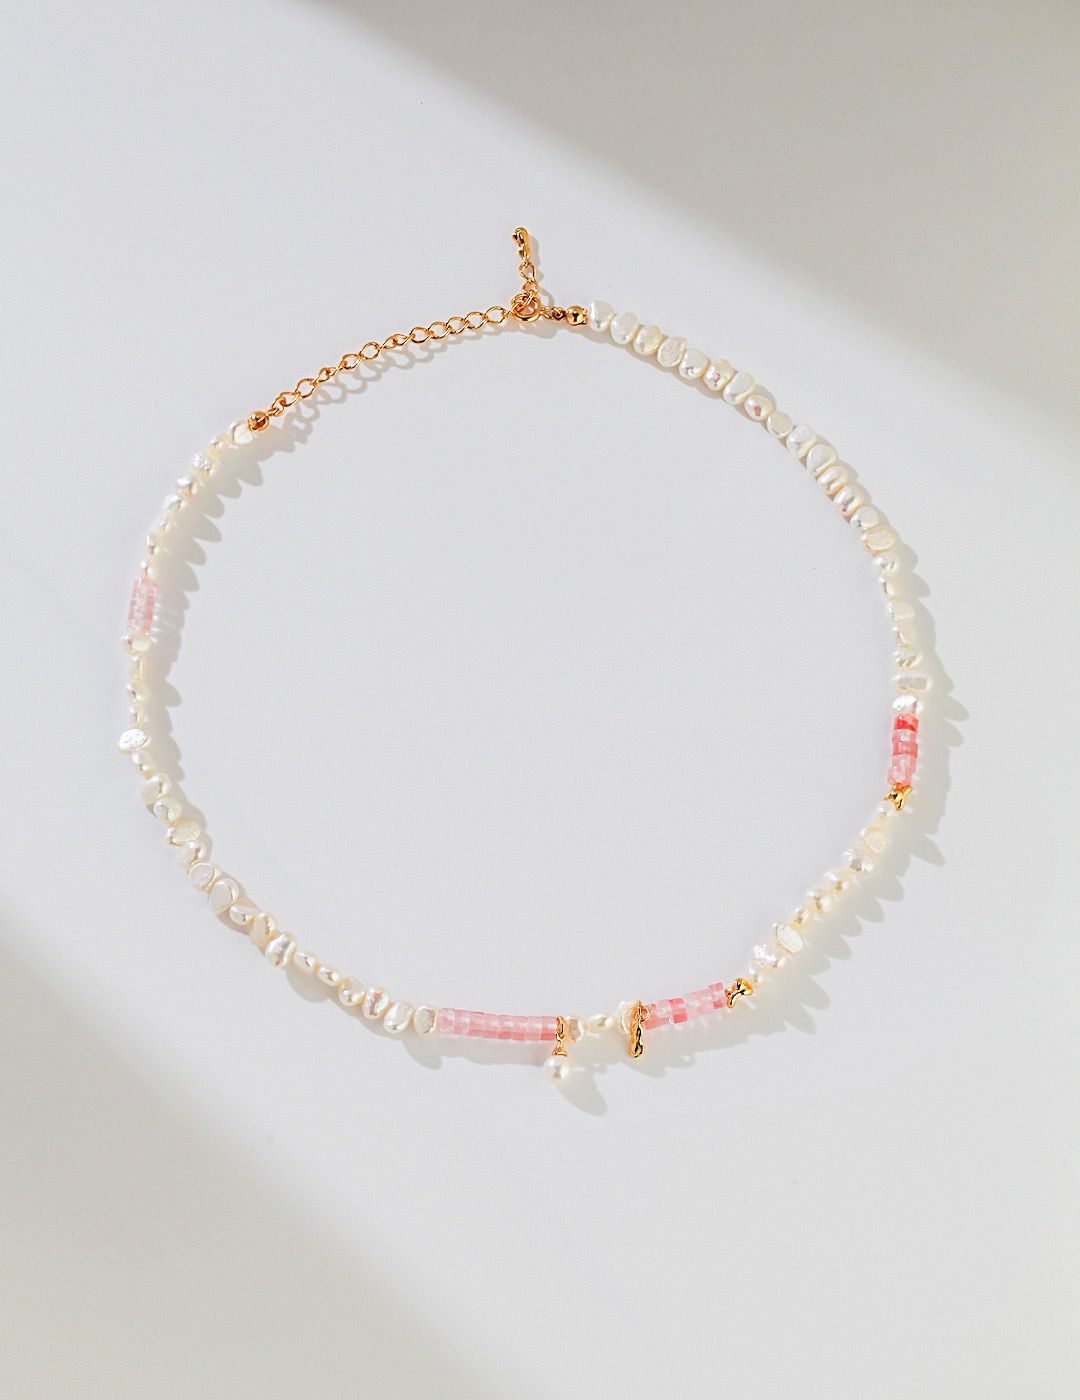 Discover our Golden Blush Pearl Necklace, with freshwater pearls and pink accents on a gold chain. Sophisticated and versatile, this piece adds elegance to any outfit.